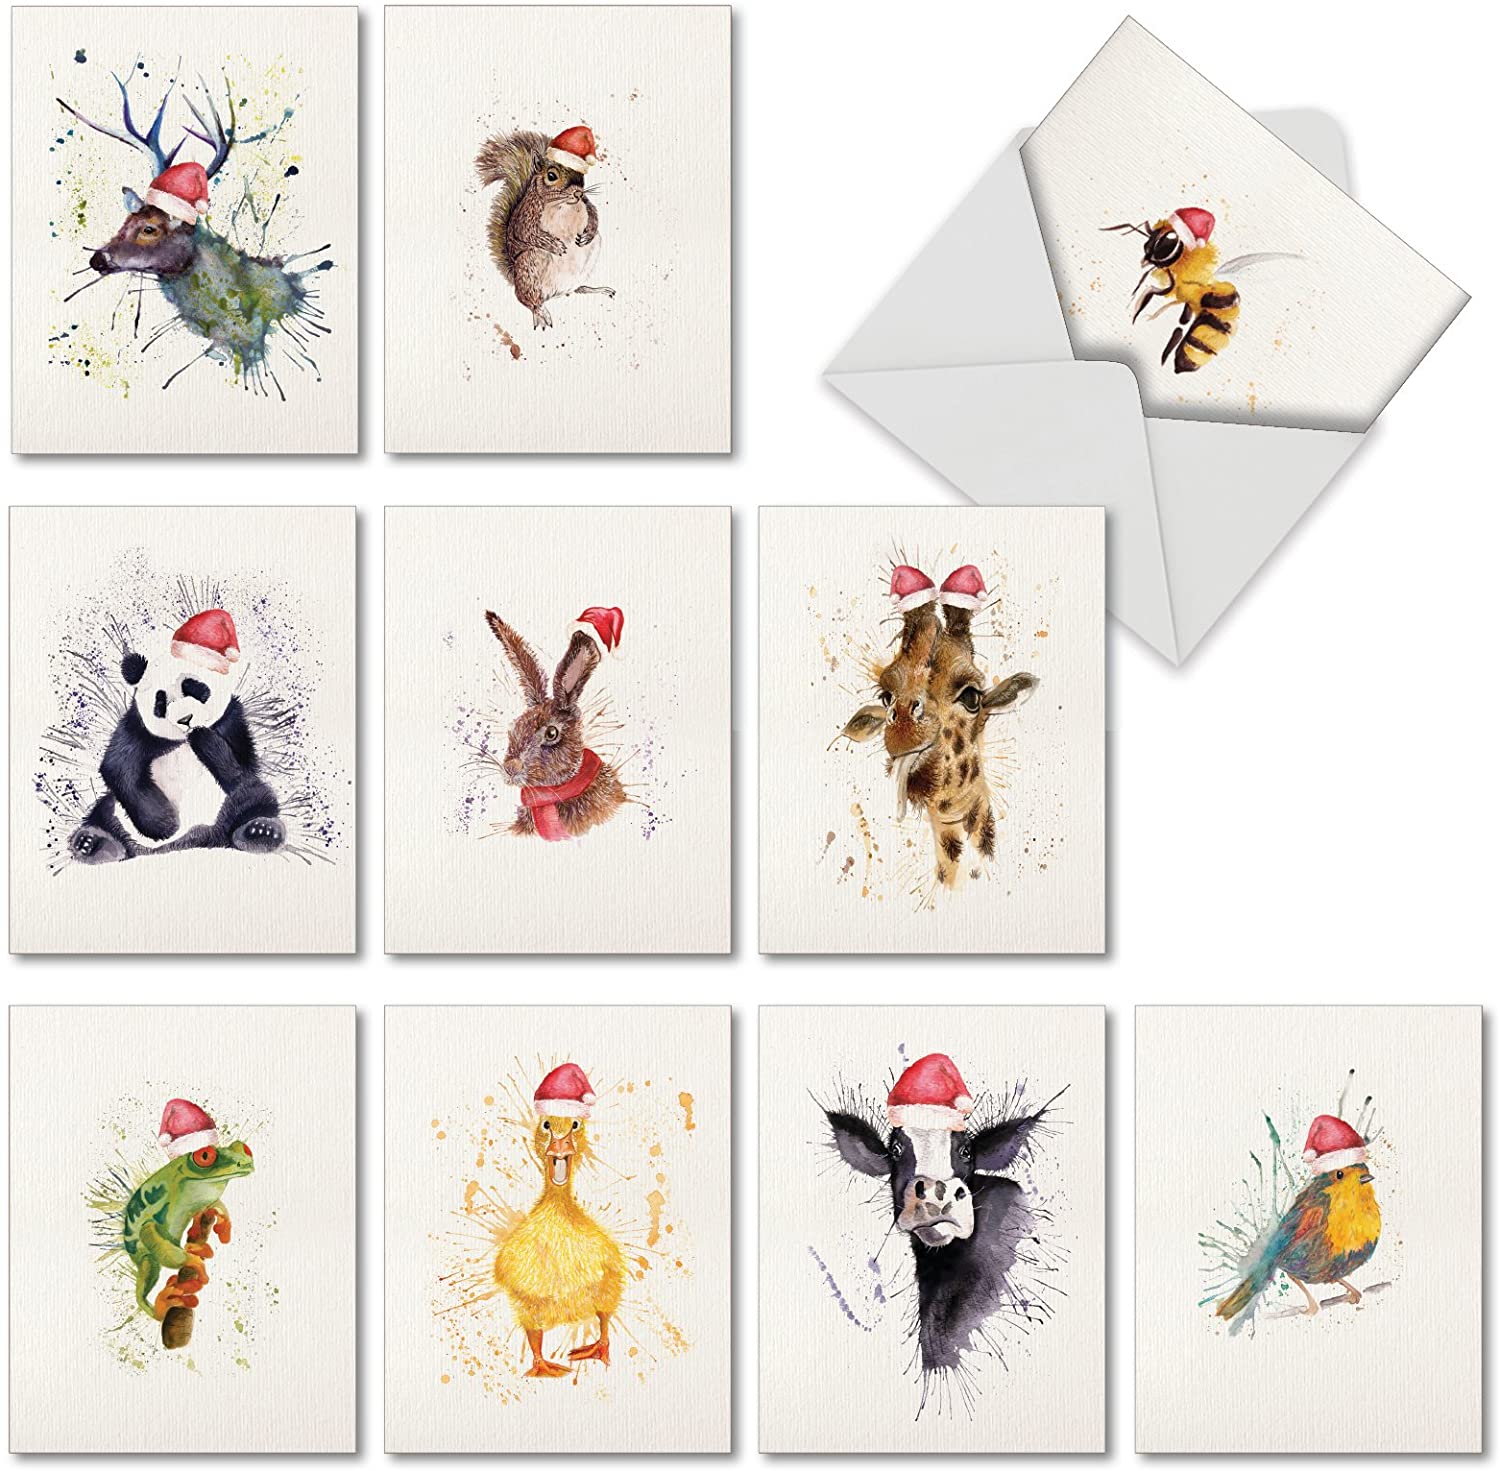 Invitations Jersey Birds \u2013 Set of 5 Greeting Cards w Envelopes \u2013 Blank Inside \u2013 All Occasion Thank You Note Card